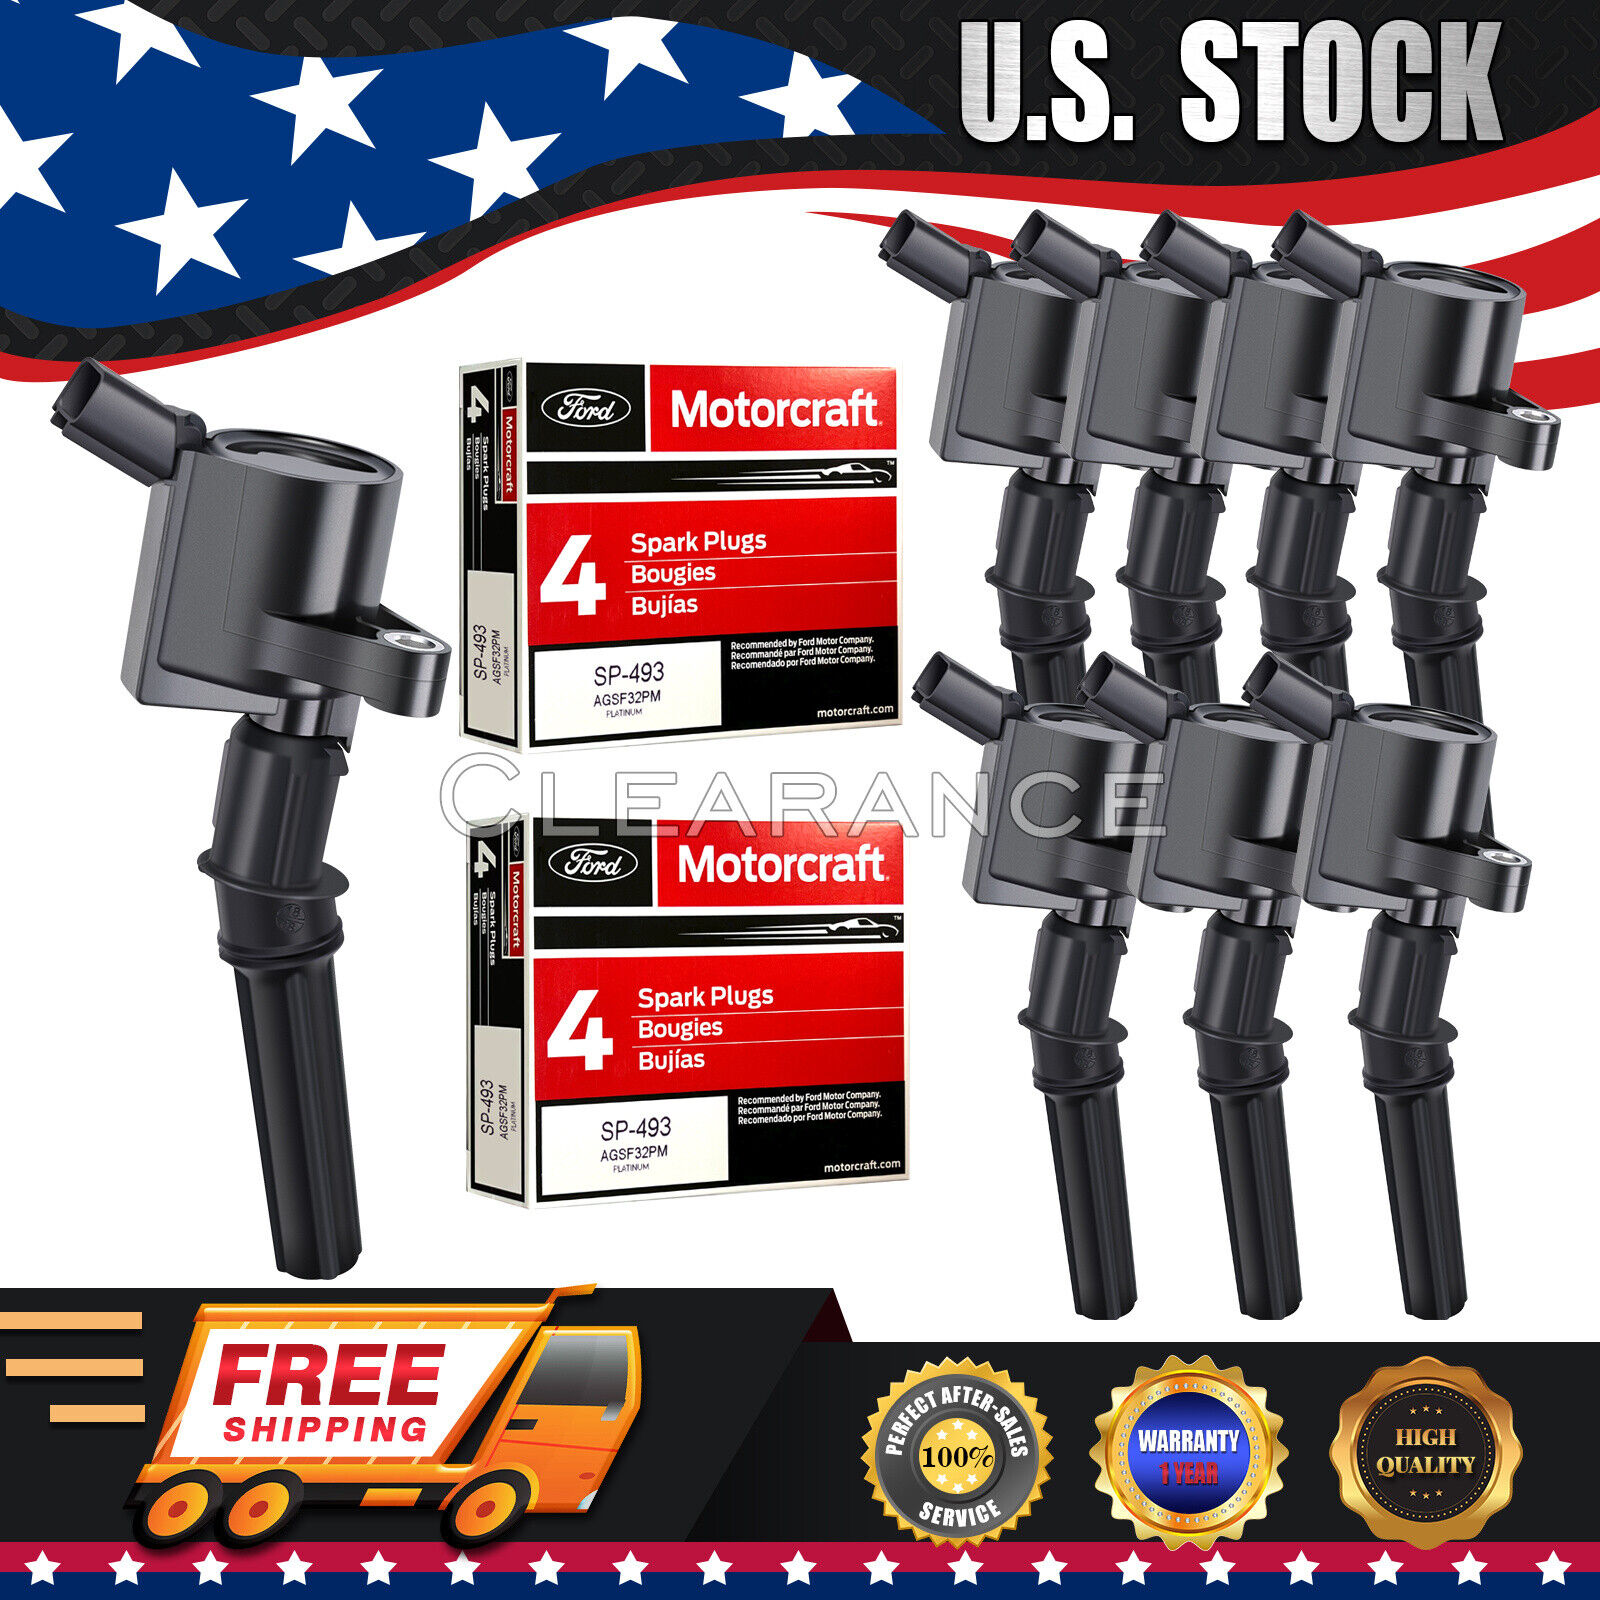 Set of 8 Ignition Coils For Ford Lincoln DG508 & 8 Motorcraft Spark Plugs SP493